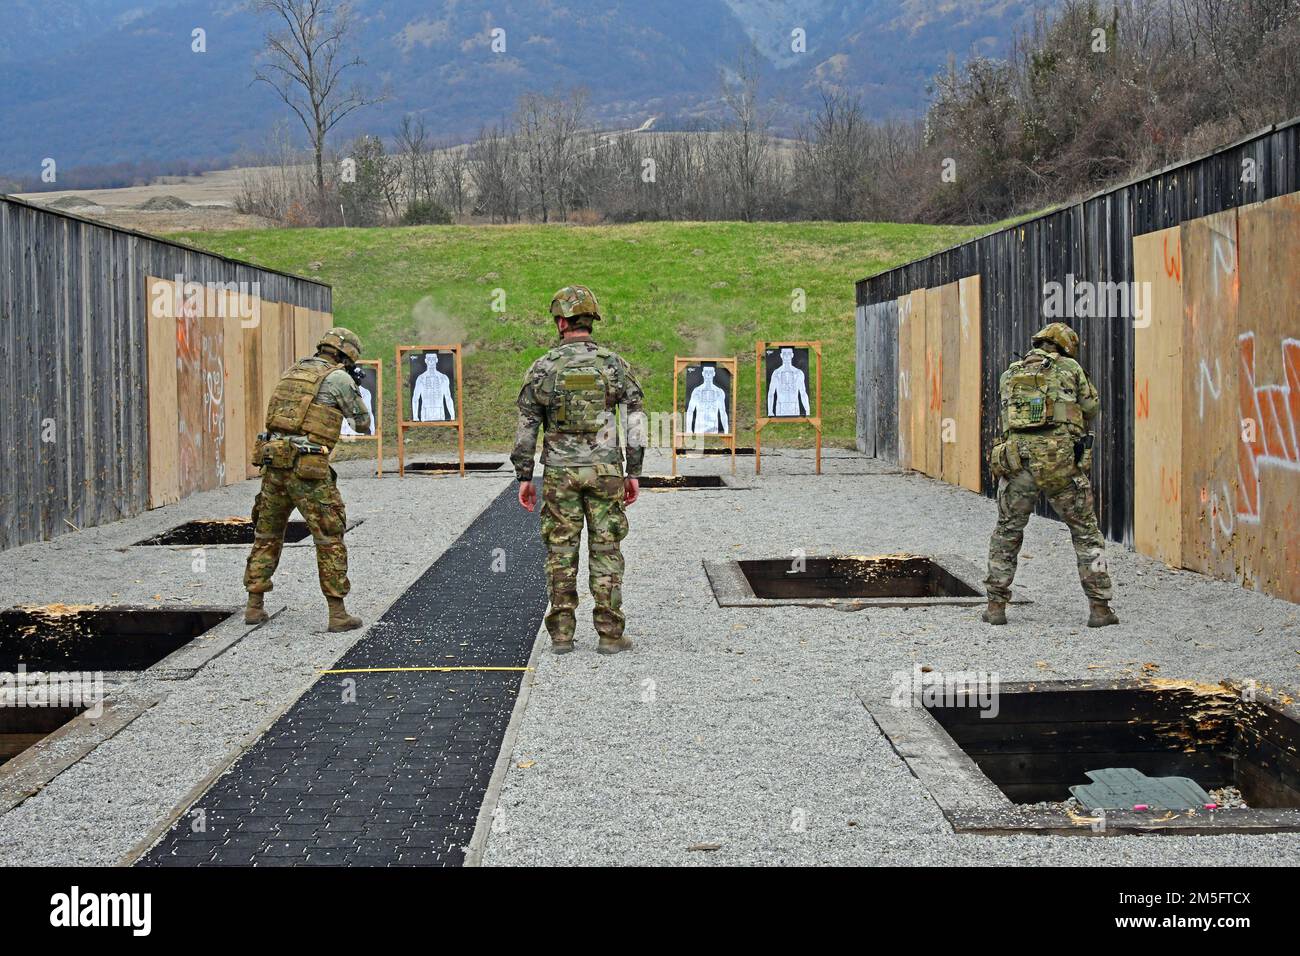 U.S. Army Paratroopers, assigned to the 1st Battalion, 503rd Infantry Regiment, 173rd Airborne Brigade, engage targets with  an M4 carbine during marksmanship training at Cao Malnisio Range, Pordenone, Italy, March 15, 2022. The 173rd Airborne Brigade is the U.S. Army’s Contingency Response Force in Europe, providing rapidly deployable forces to United States European, African, and Central Command areas of responsibility. Stock Photo